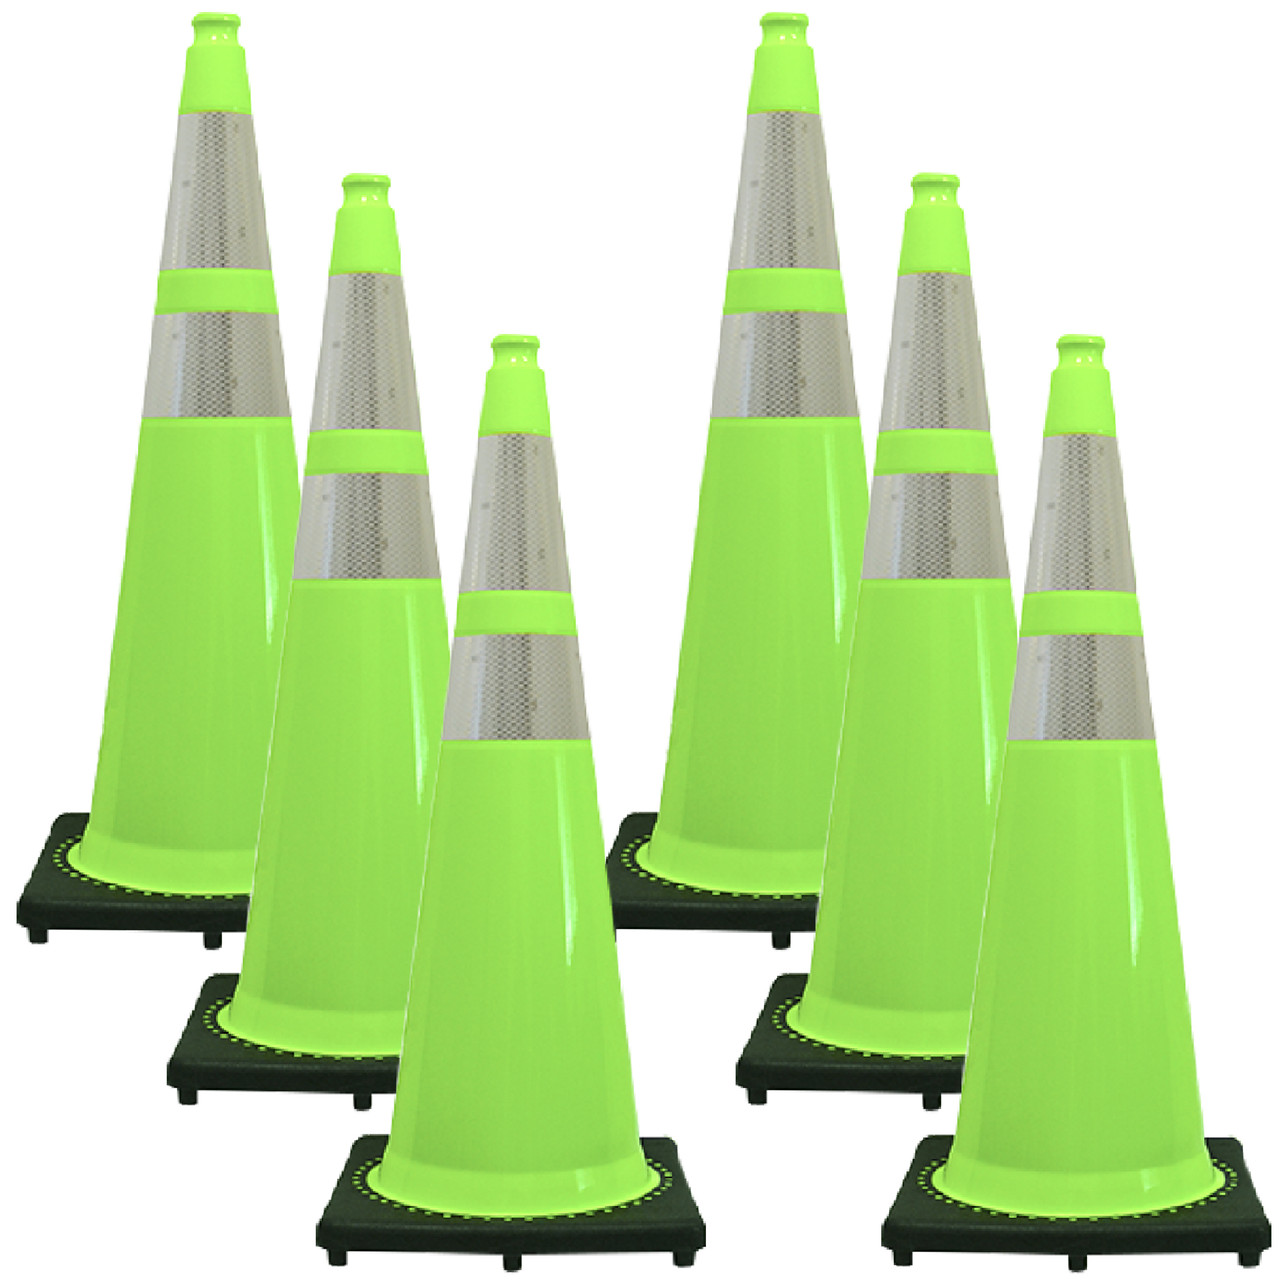 Colored Traffic Cones - Sets of 6 in 3 sizes